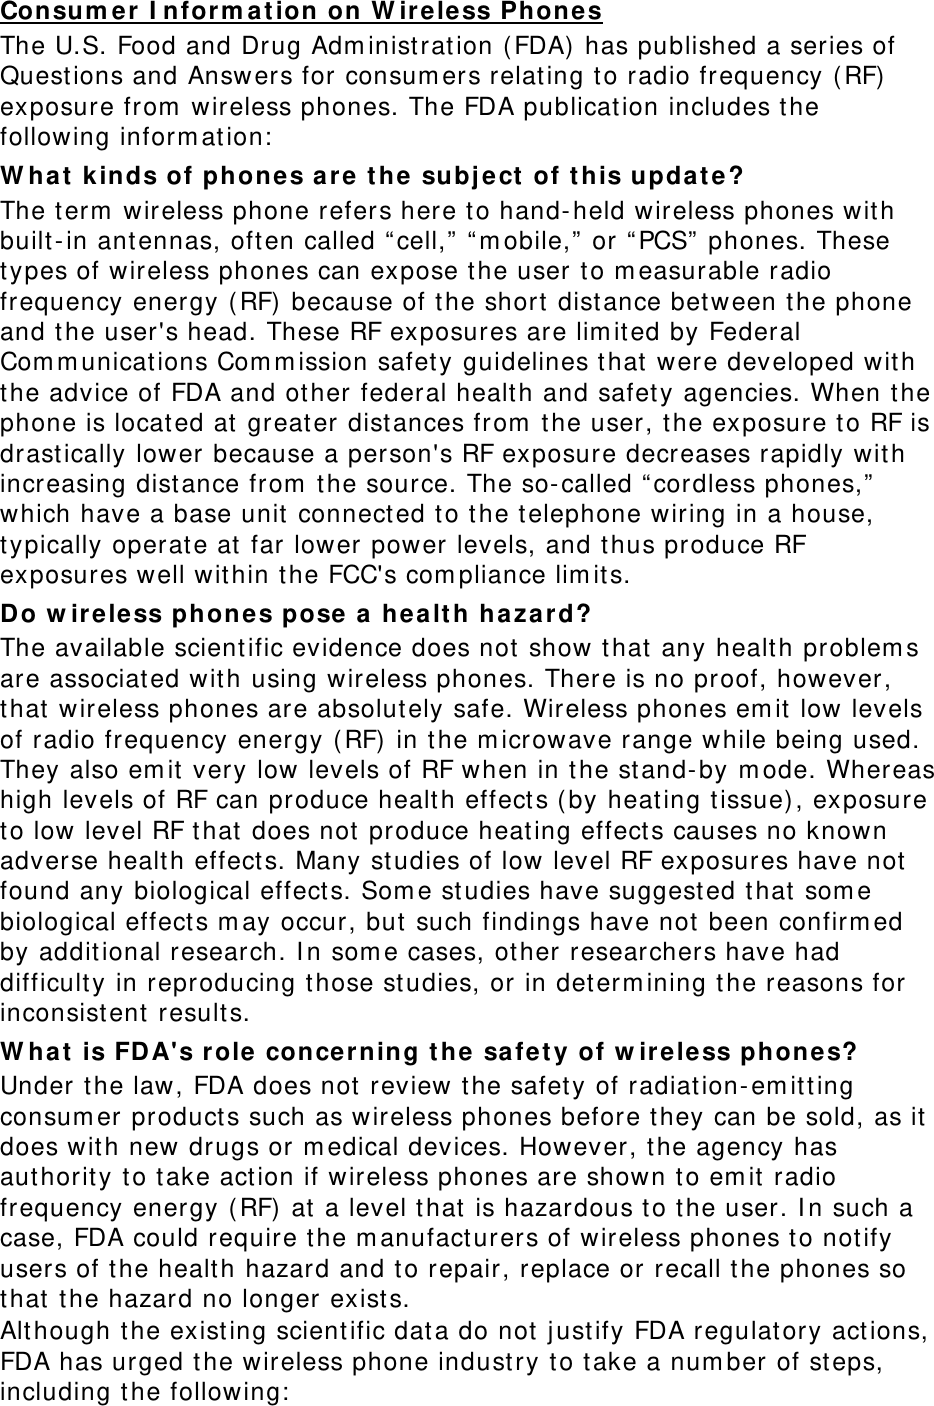 Consum e r I nform at ion on W ireless Phone s The U.S. Food and Drug Adm inist rat ion ( FDA)  has published a ser ies of Quest ions and Answers for consum ers relating to radio frequency (RF)  exposure from  wireless phones. The FDA publication includes the follow ing inform at ion:  W h at  kinds of phones ar e  the  subj e ct  of t his upda t e? The term  wireless phone refers here to hand-held wireless phones with built-in antennas, oft en called “ cell,”  “ m obile,” or  “ PCS”  phones. These types of wireless phones can expose the user to m easurable radio frequency energy (RF) because of the short dist ance betw een the phone and t he user&apos;s head. These RF exposures are lim it ed by Federal Com m unicat ions Com m ission safety guidelines that  were developed w it h the advice of FDA and ot her federal healt h and safet y agencies. When the phone is located at  great er dist ances from  the user, the exposure t o RF is drast ically lower because a person&apos;s RF exposure decreases rapidly wit h increasing dist ance from  the source. The so-called “cordless phones,”  which have a base unit  connect ed to the t elephone wir ing in a house, typically operat e at  far lower power levels, and thus produce RF exposures well wit hin t he FCC&apos;s com pliance lim it s. Do w ire less phon e s pose a  he a lt h ha za r d? The available scient ific evidence does not show that  any health problem s are associated wit h using wireless phones. Ther e is no proof, however , that  wireless phones are absolut ely safe. Wireless phones em it low levels of radio frequency energy ( RF)  in t he m icrowave range while being used. They also em it  very low levels of RF when in the st and-by  m ode. Whereas high levels of RF can produce healt h effects (by heat ing tissue) , exposure to low level RF t hat  does not produce heat ing effect s causes no known adverse healt h effect s. Many st udies of low level RF exposures have not found any biological effect s. Som e st udies have suggest ed that  some biological effects m ay occur, but  such findings have not  been confirm ed by addit ional research. I n som e cases, ot her researchers have had difficulty in reproducing those st udies, or in det erm ining t he reasons for inconsist ent  result s. W h at  is FDA&apos;s role concerning the  sa fet y of w ireless phones? Under the law , FDA does not  review the safet y of radiation-em it t ing consum er product s such as wireless phones before t hey can be sold, as it does wit h new drugs or m edical devices. However, the agency has authorit y  to take act ion if wireless phones are shown to em it  radio frequency energy (RF) at  a level t hat  is hazardous to the user. I n such a case, FDA could require t he m anufact urers of wireless phones to not ify users of the healt h hazard and t o repair, replace or recall t he phones so that  t he hazard no longer exists. Although t he exist ing scient ific dat a do not  j ust ify FDA regulatory act ions, FDA has urged t he wireless phone industry t o t ake a num ber of st eps, including t he following:  